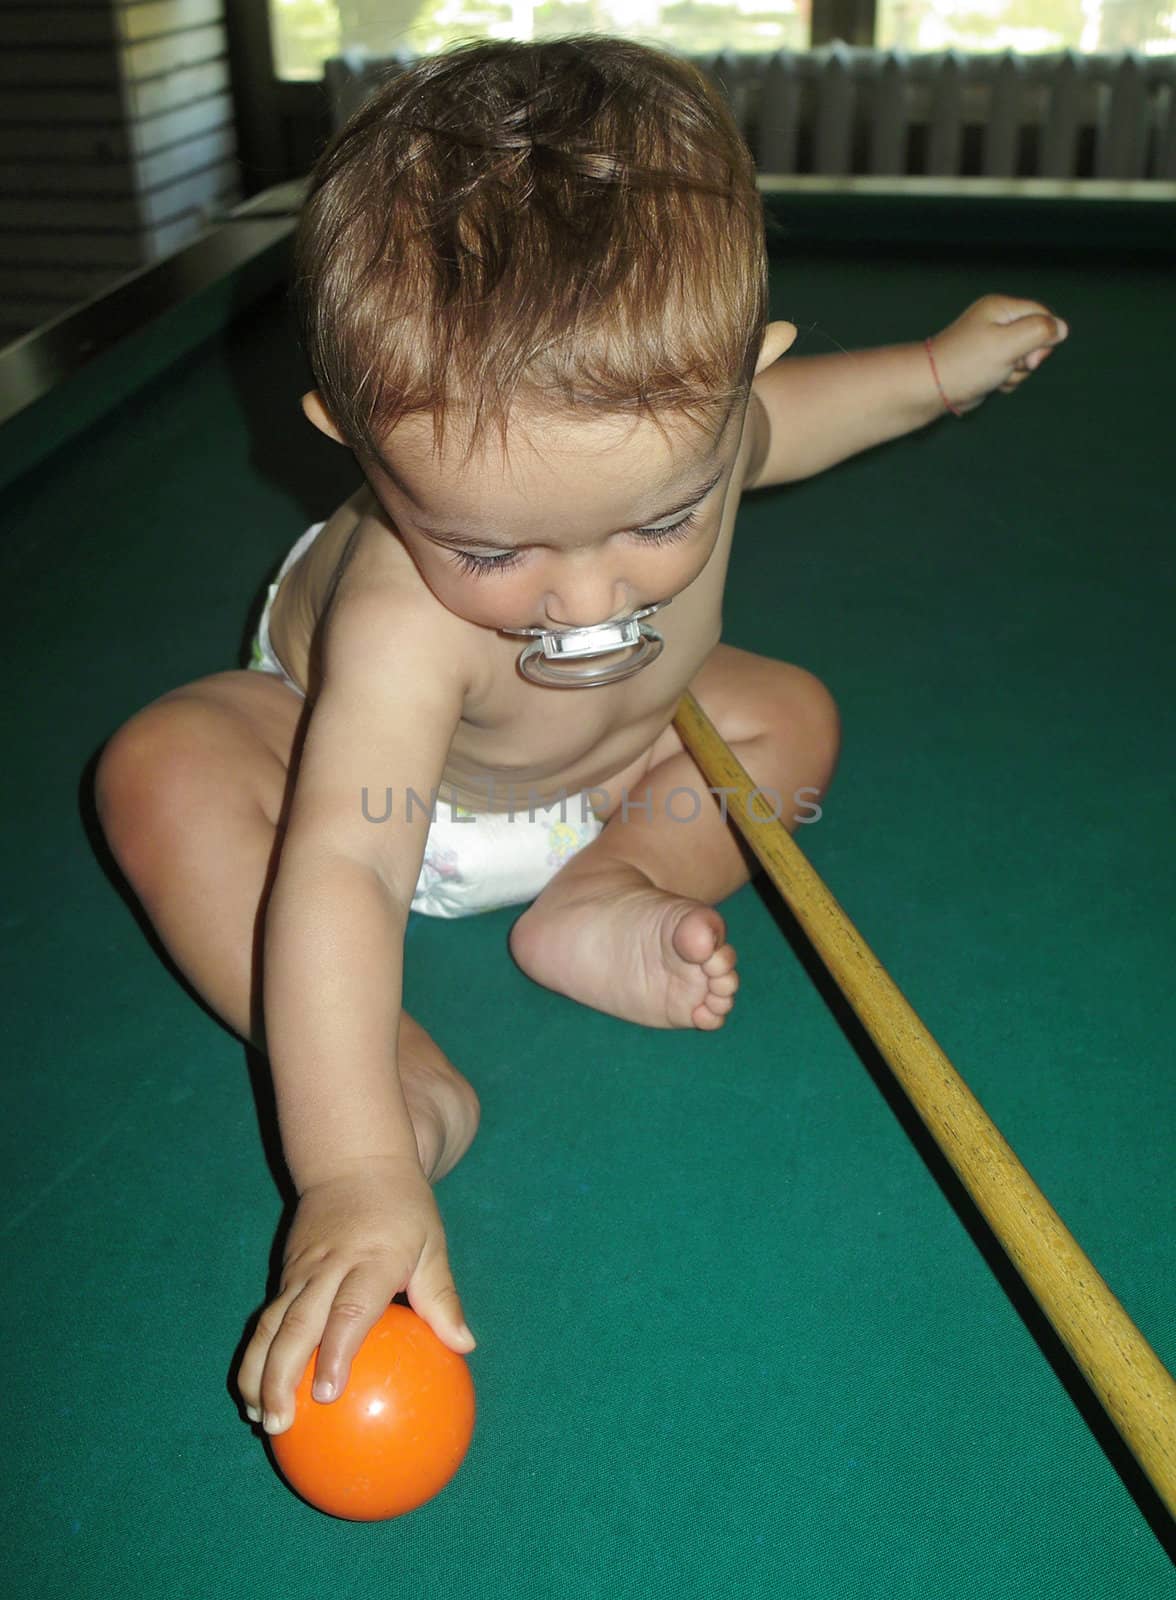 Little boy playing snooker by sattva